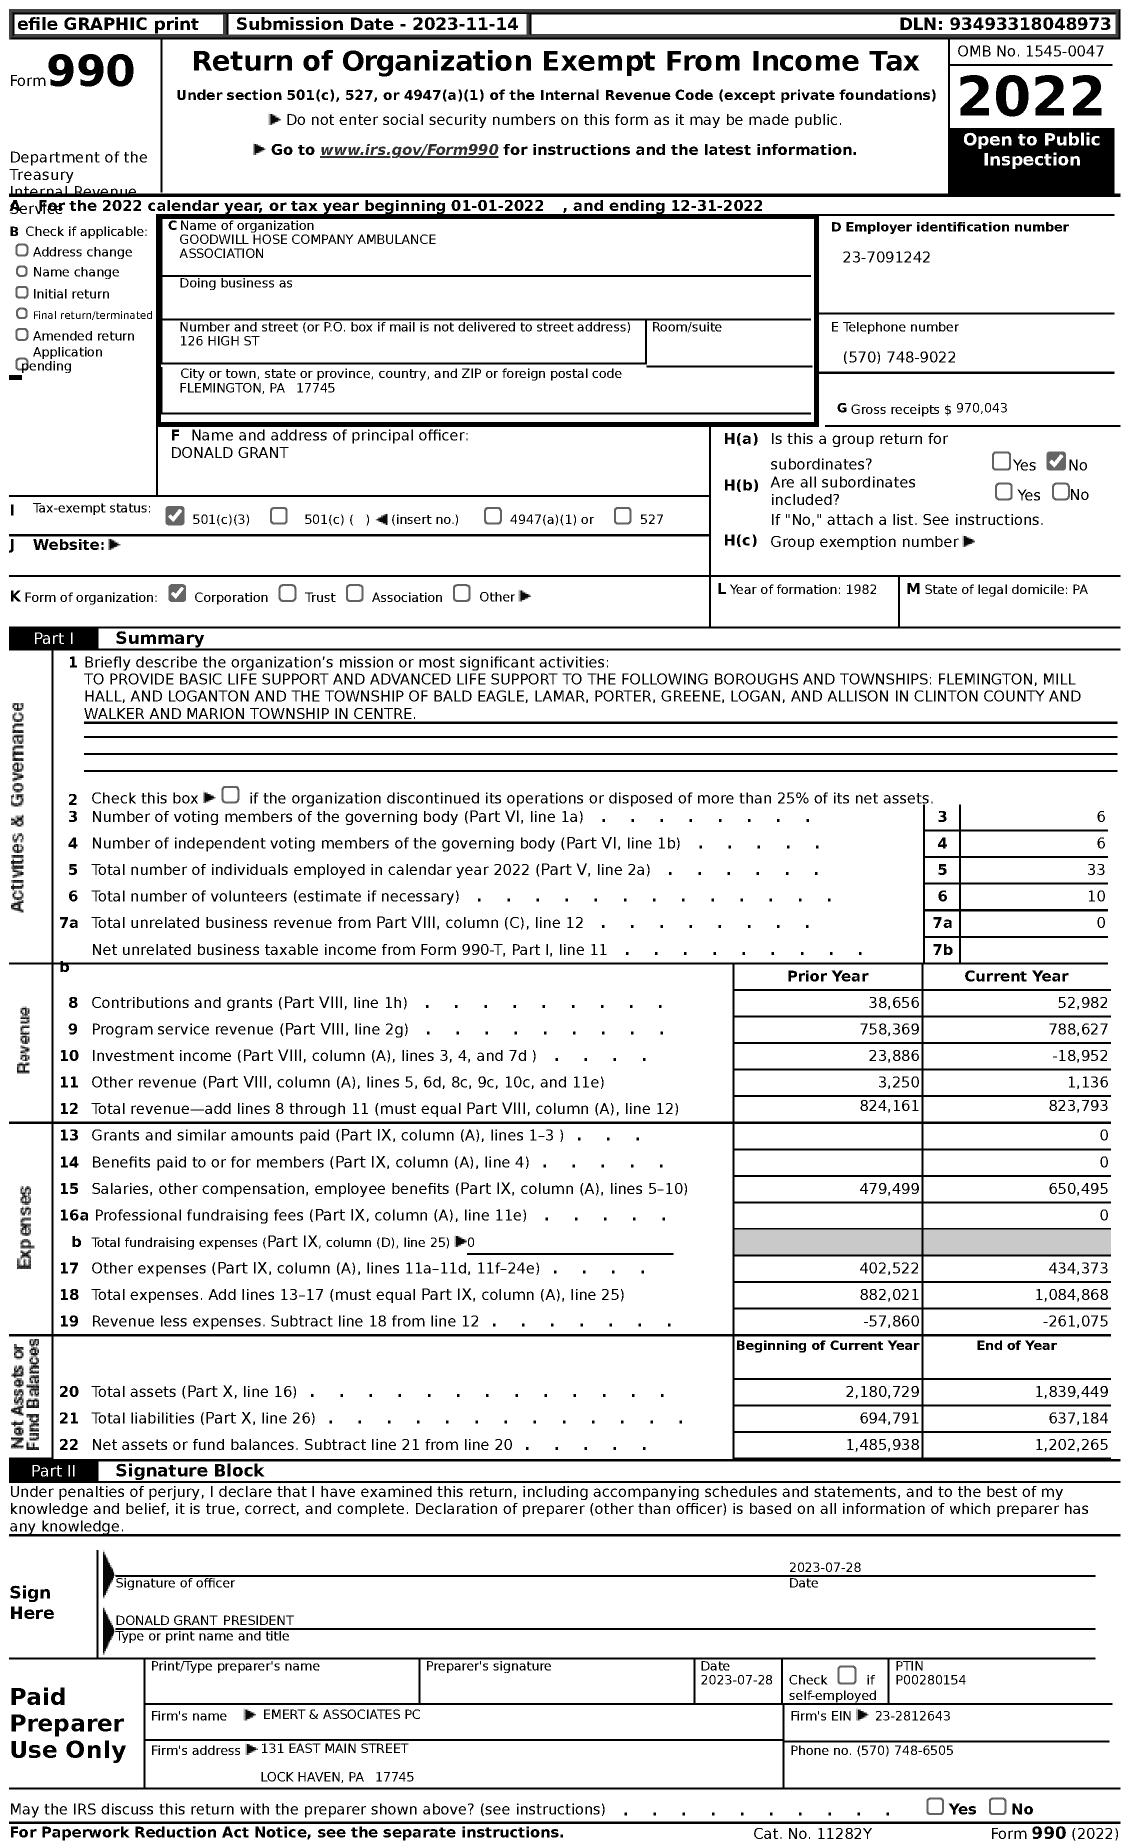 Image of first page of 2022 Form 990 for Goodwill Hose Company Ambulance Association